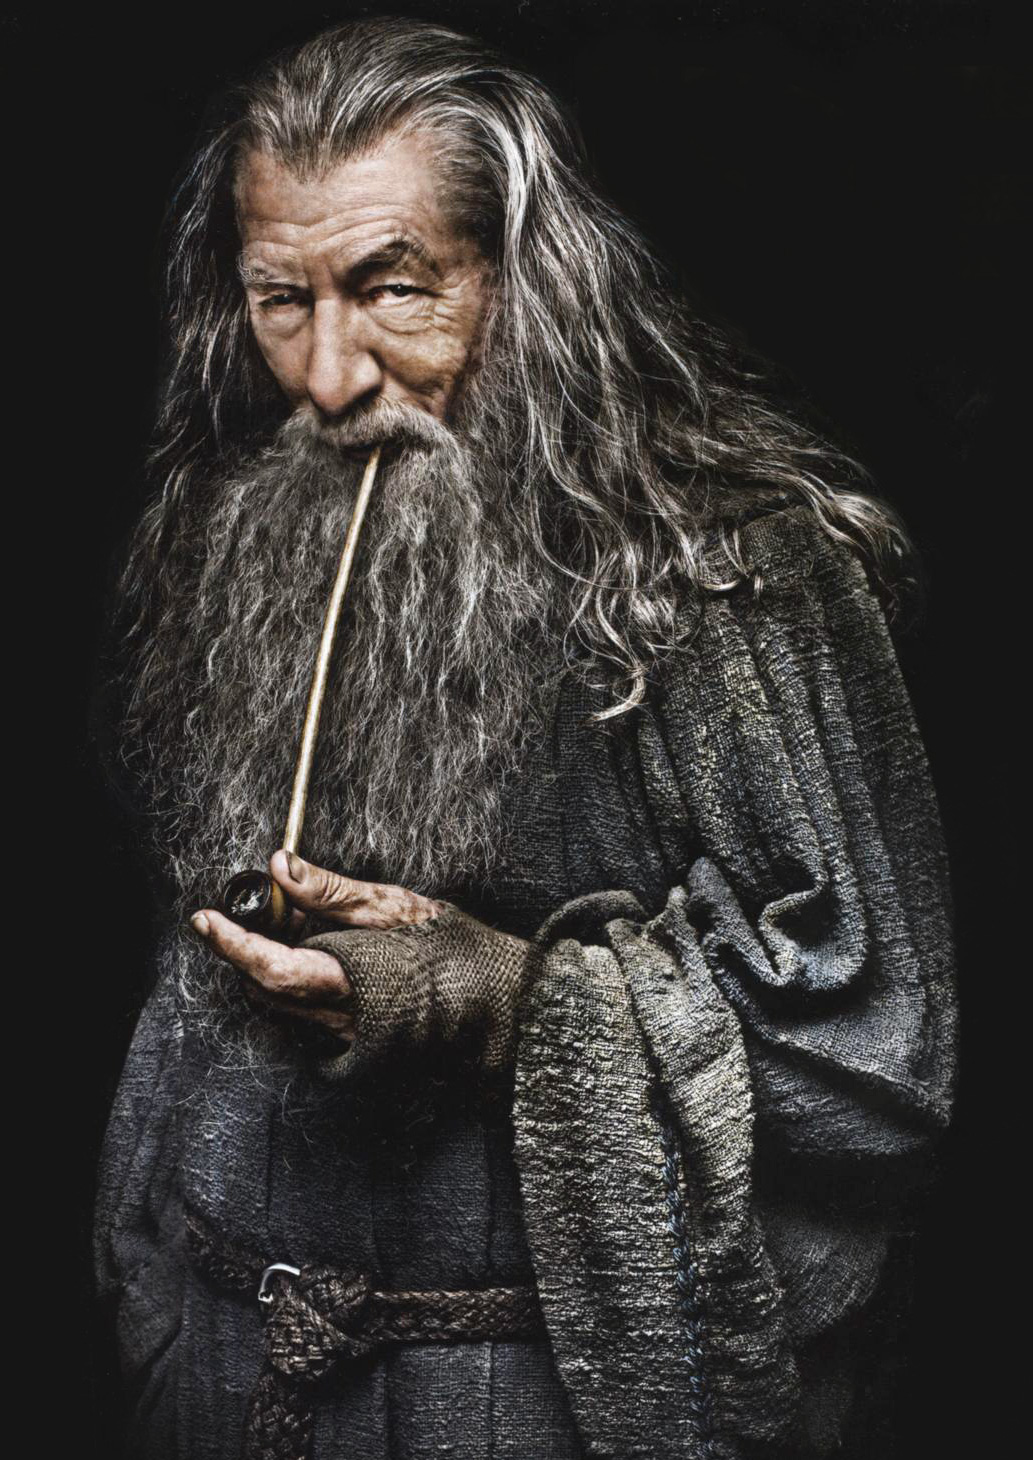 Gandalf | The One Wiki to Rule Them All | Fandom